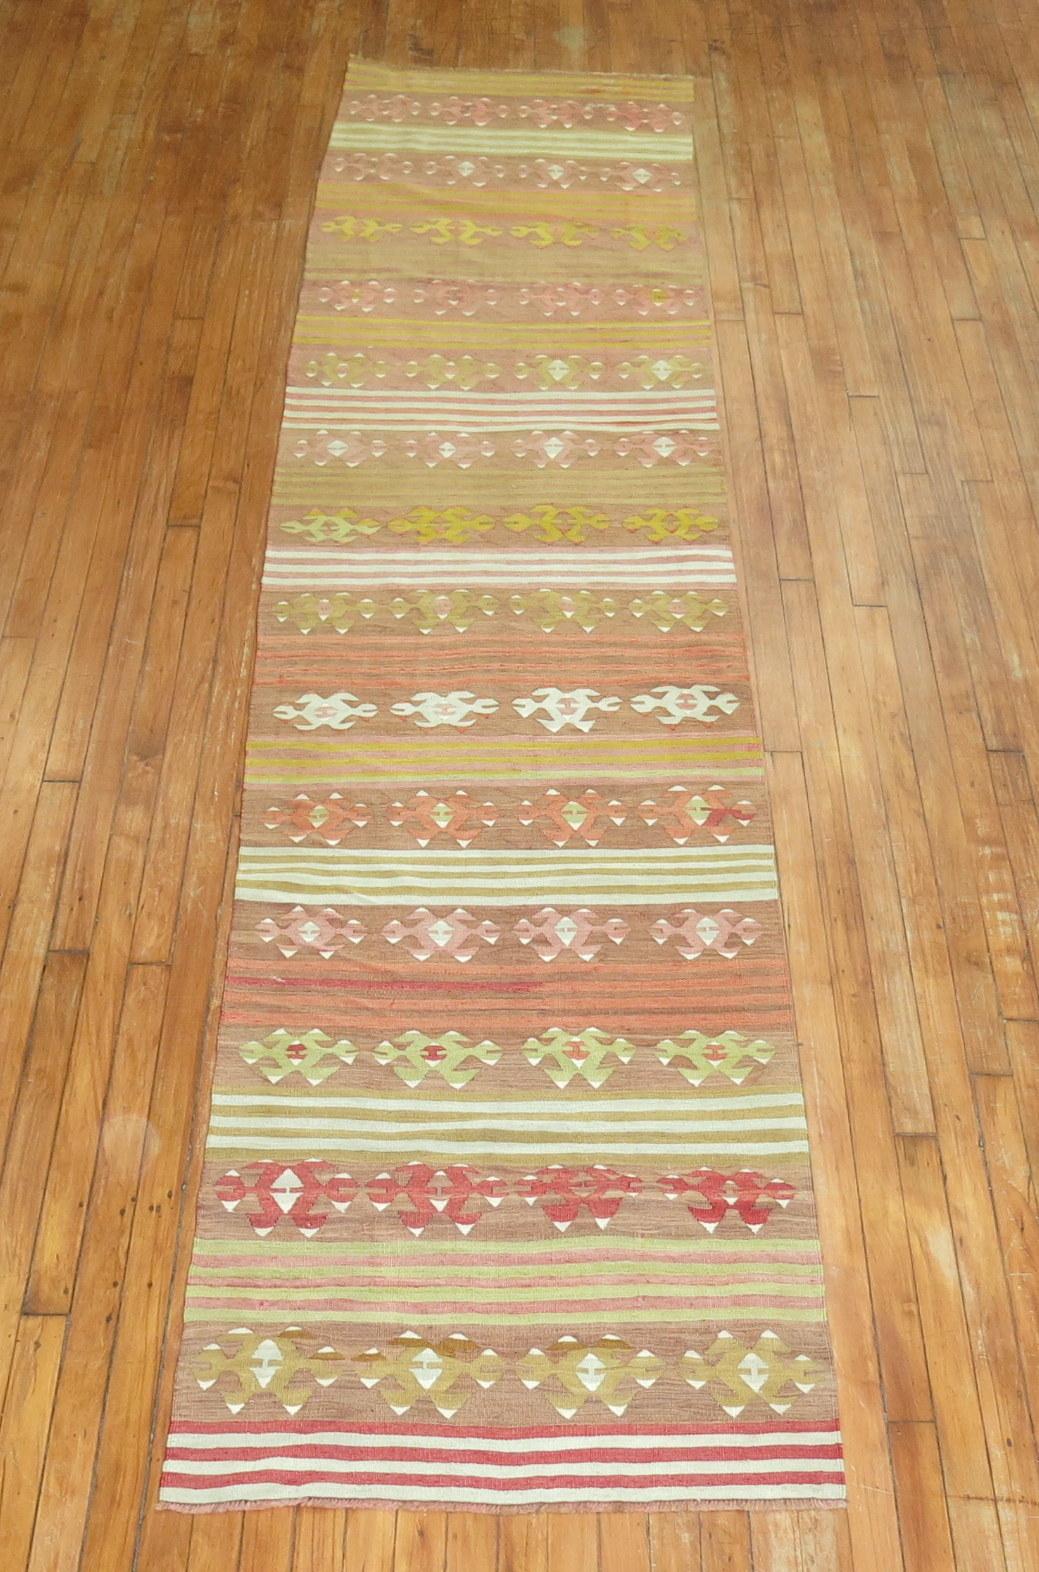 One-of-a-kind flat-woven one-of-a-kind Turkish Kilim runner in warm colors.

Measures: 2'7'' x 11'10''.